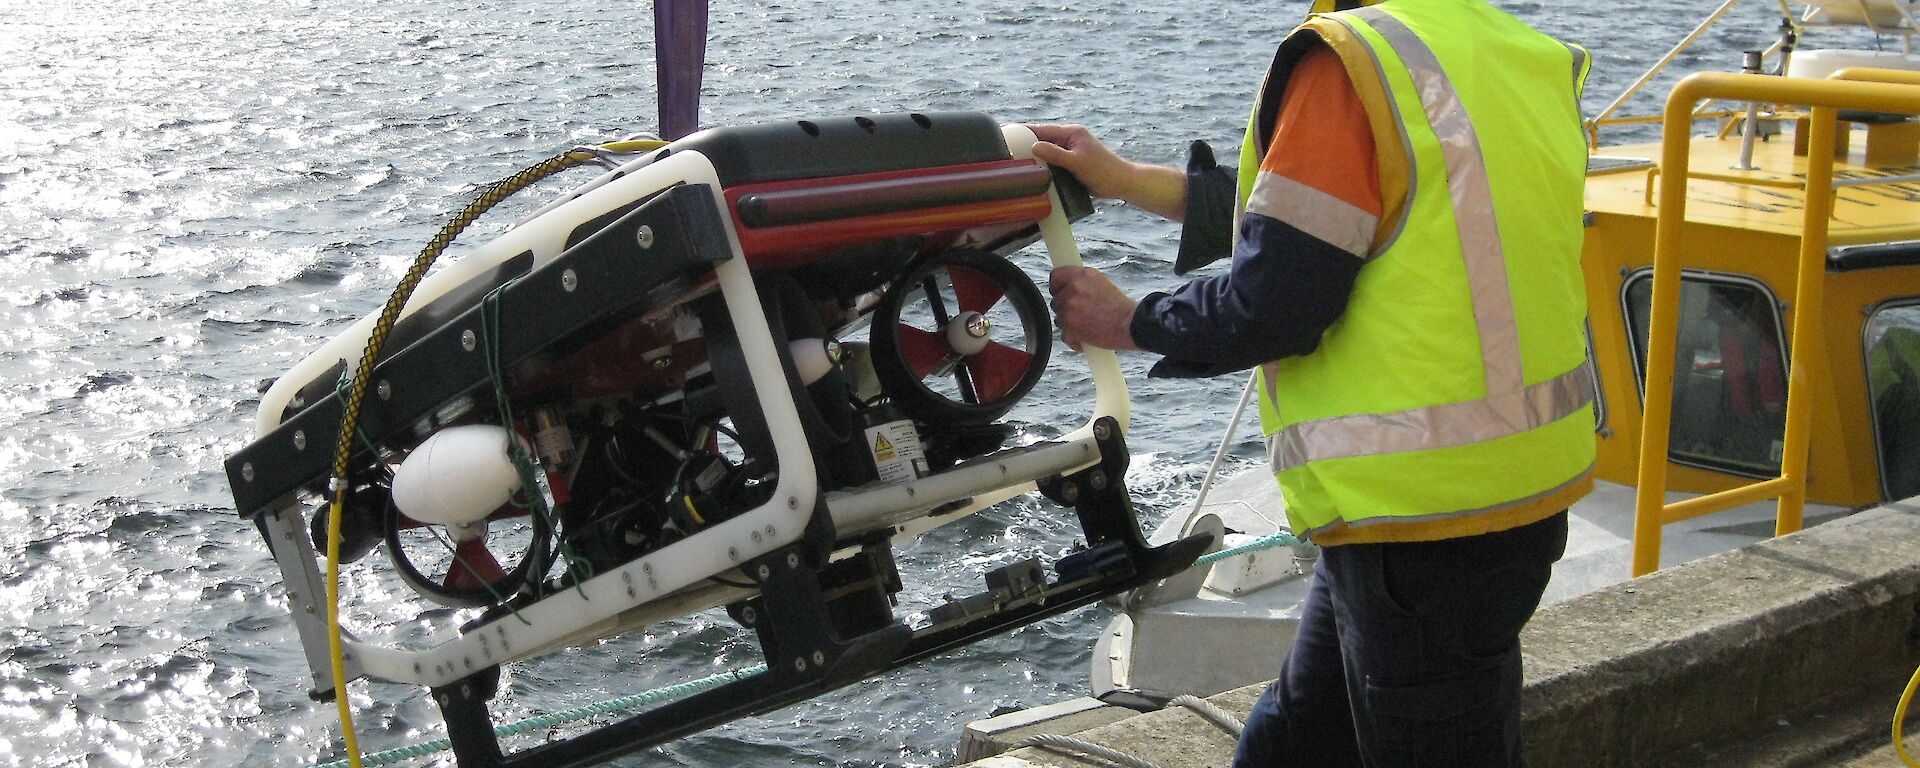 The ROV being lowered by a crane into the Derwent River.